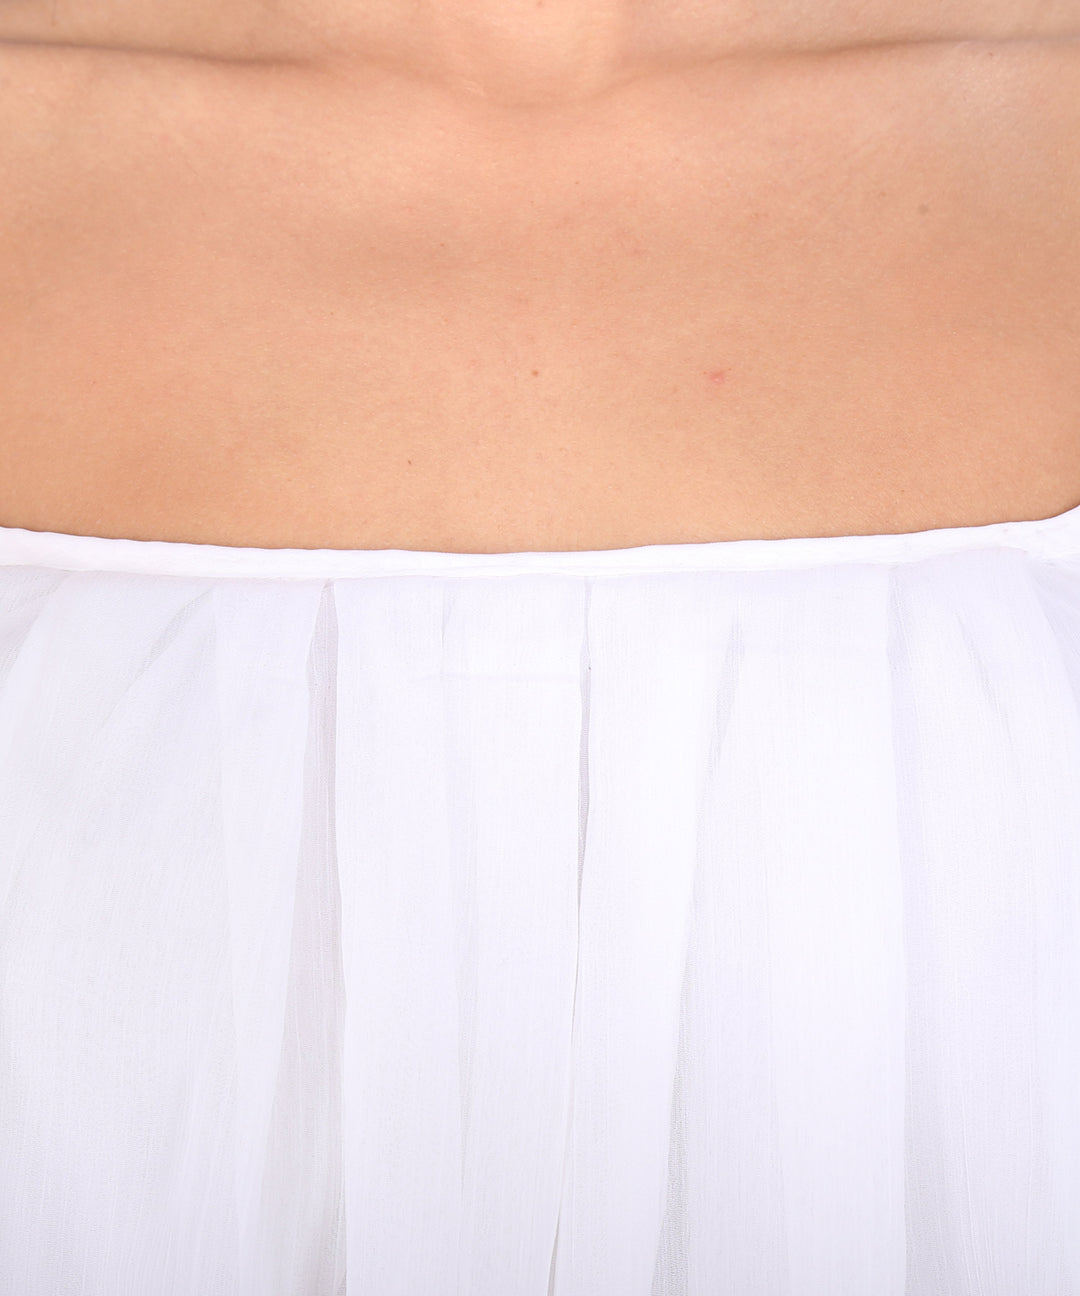 White Flapped Pleated Dress